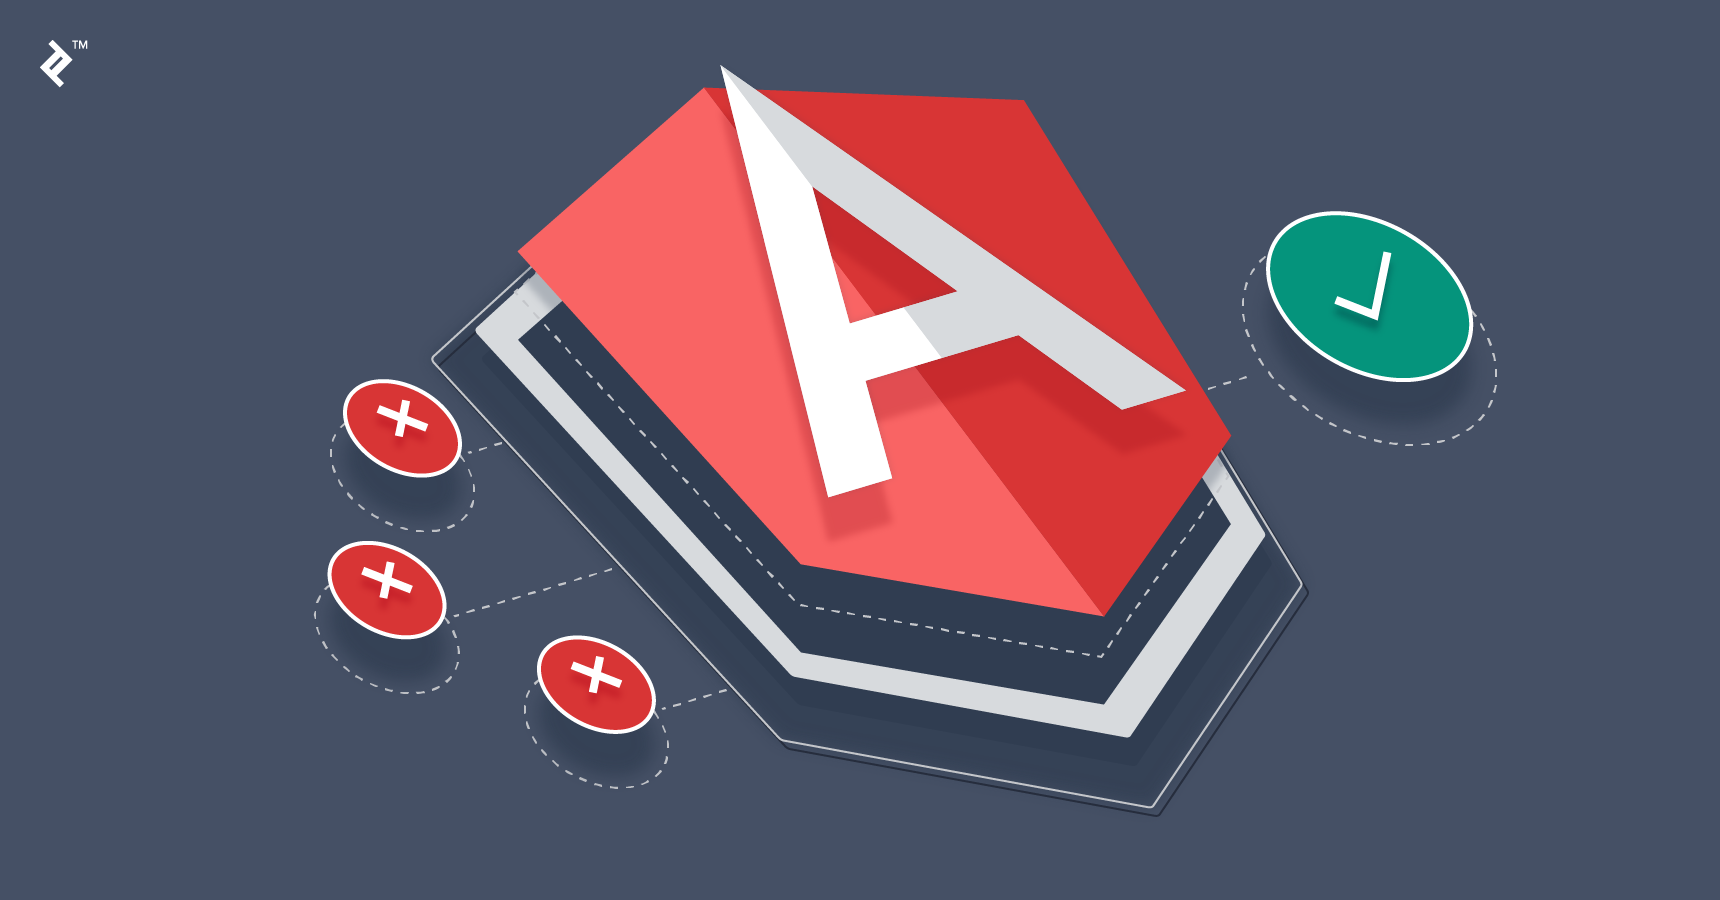 Top Most Mon Angularjs Mistakes That Developers Make Toptal